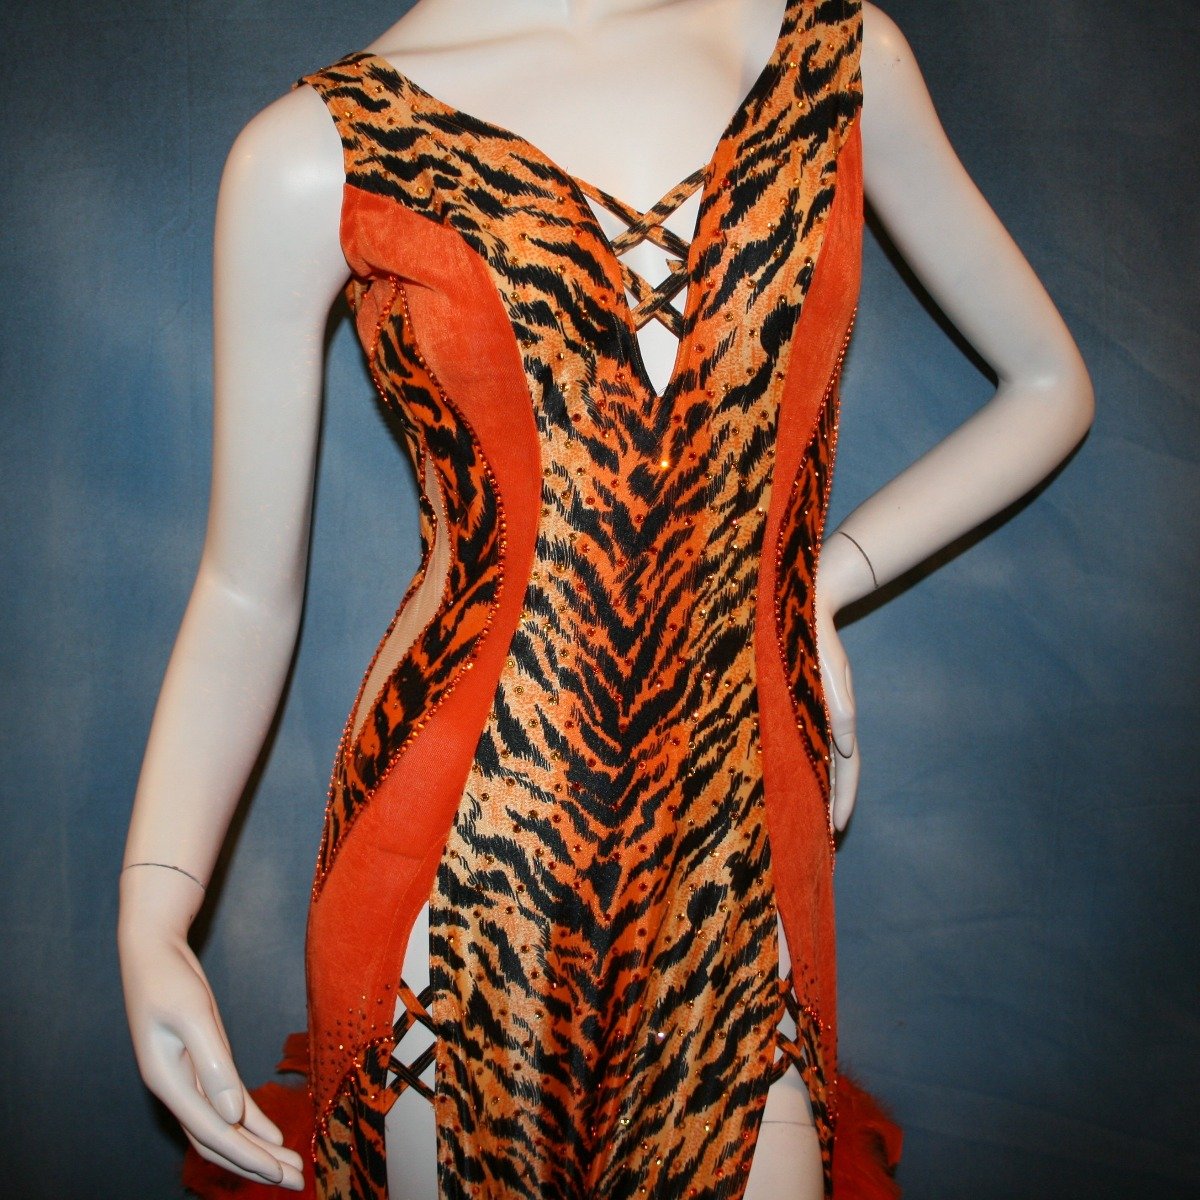 Crystal's Creations close up view of orange & black tiger print Latin/rhythm dress with chandelle feathers & hand beading